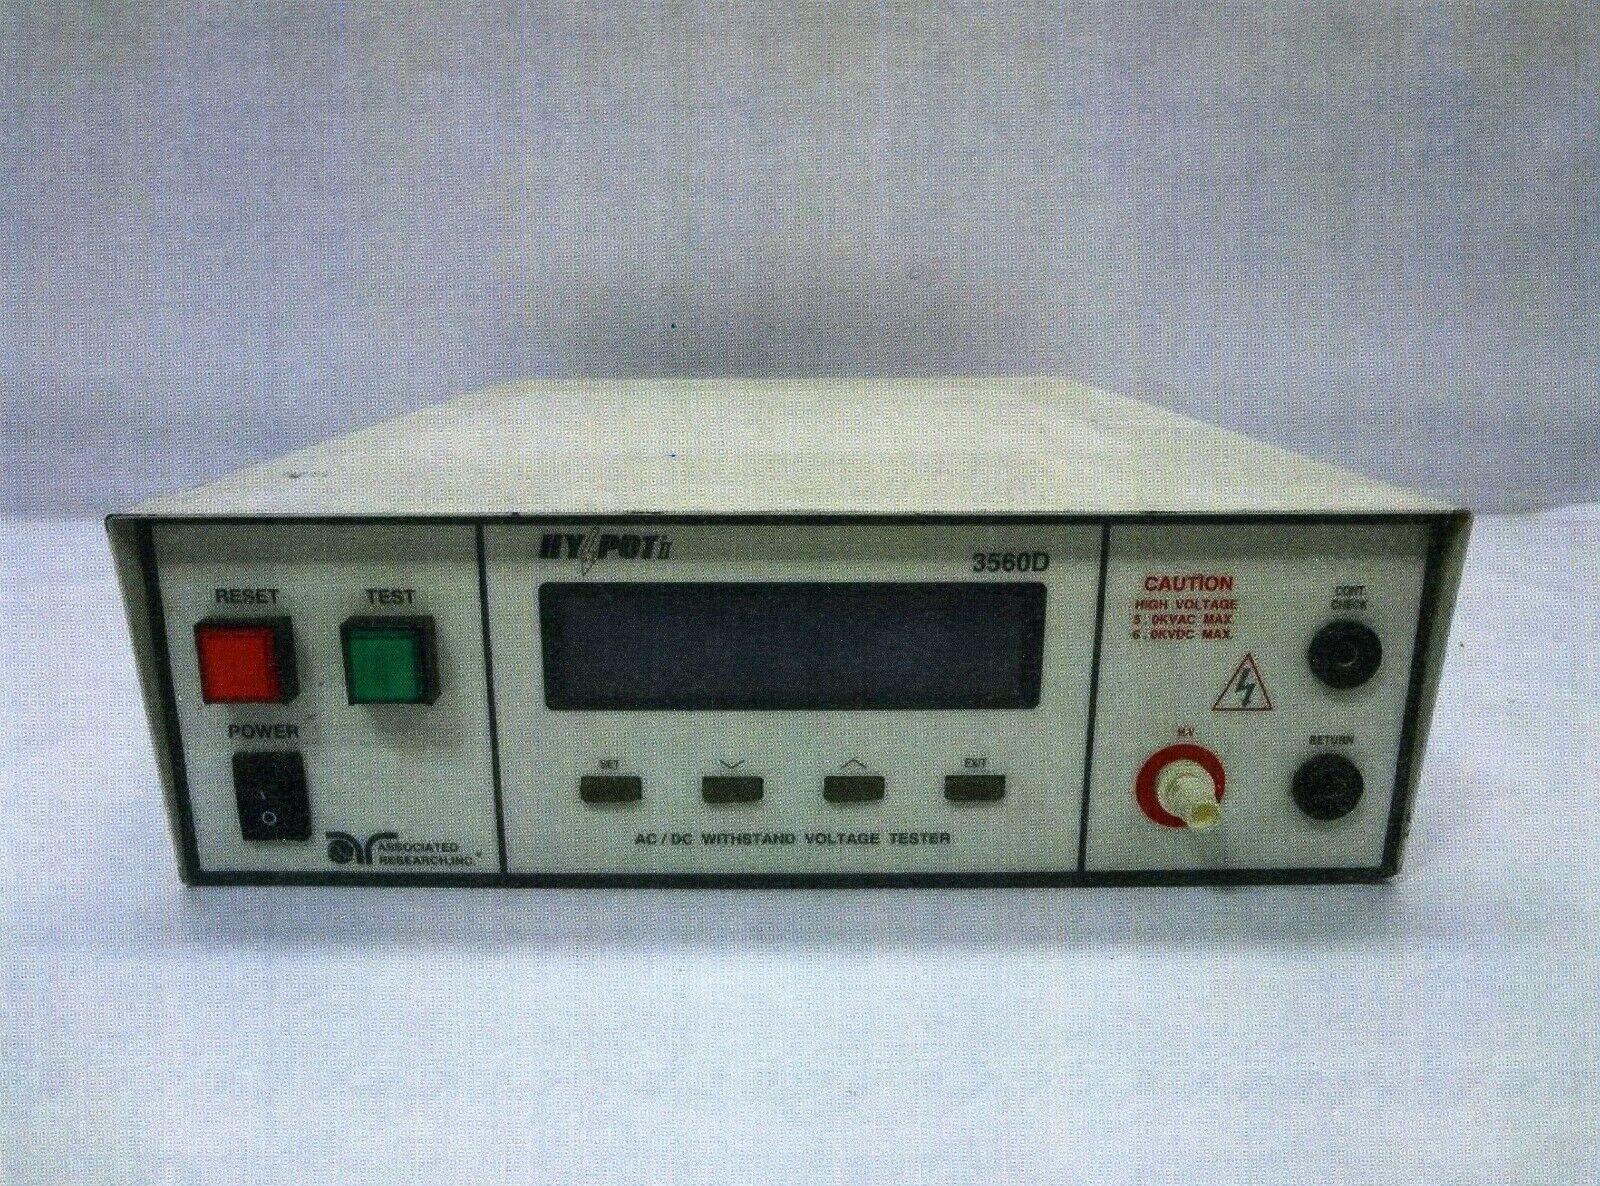 ASSOCIATED REASERCH HYPOT II 3560 AC/DC VOLTAGE TESTER